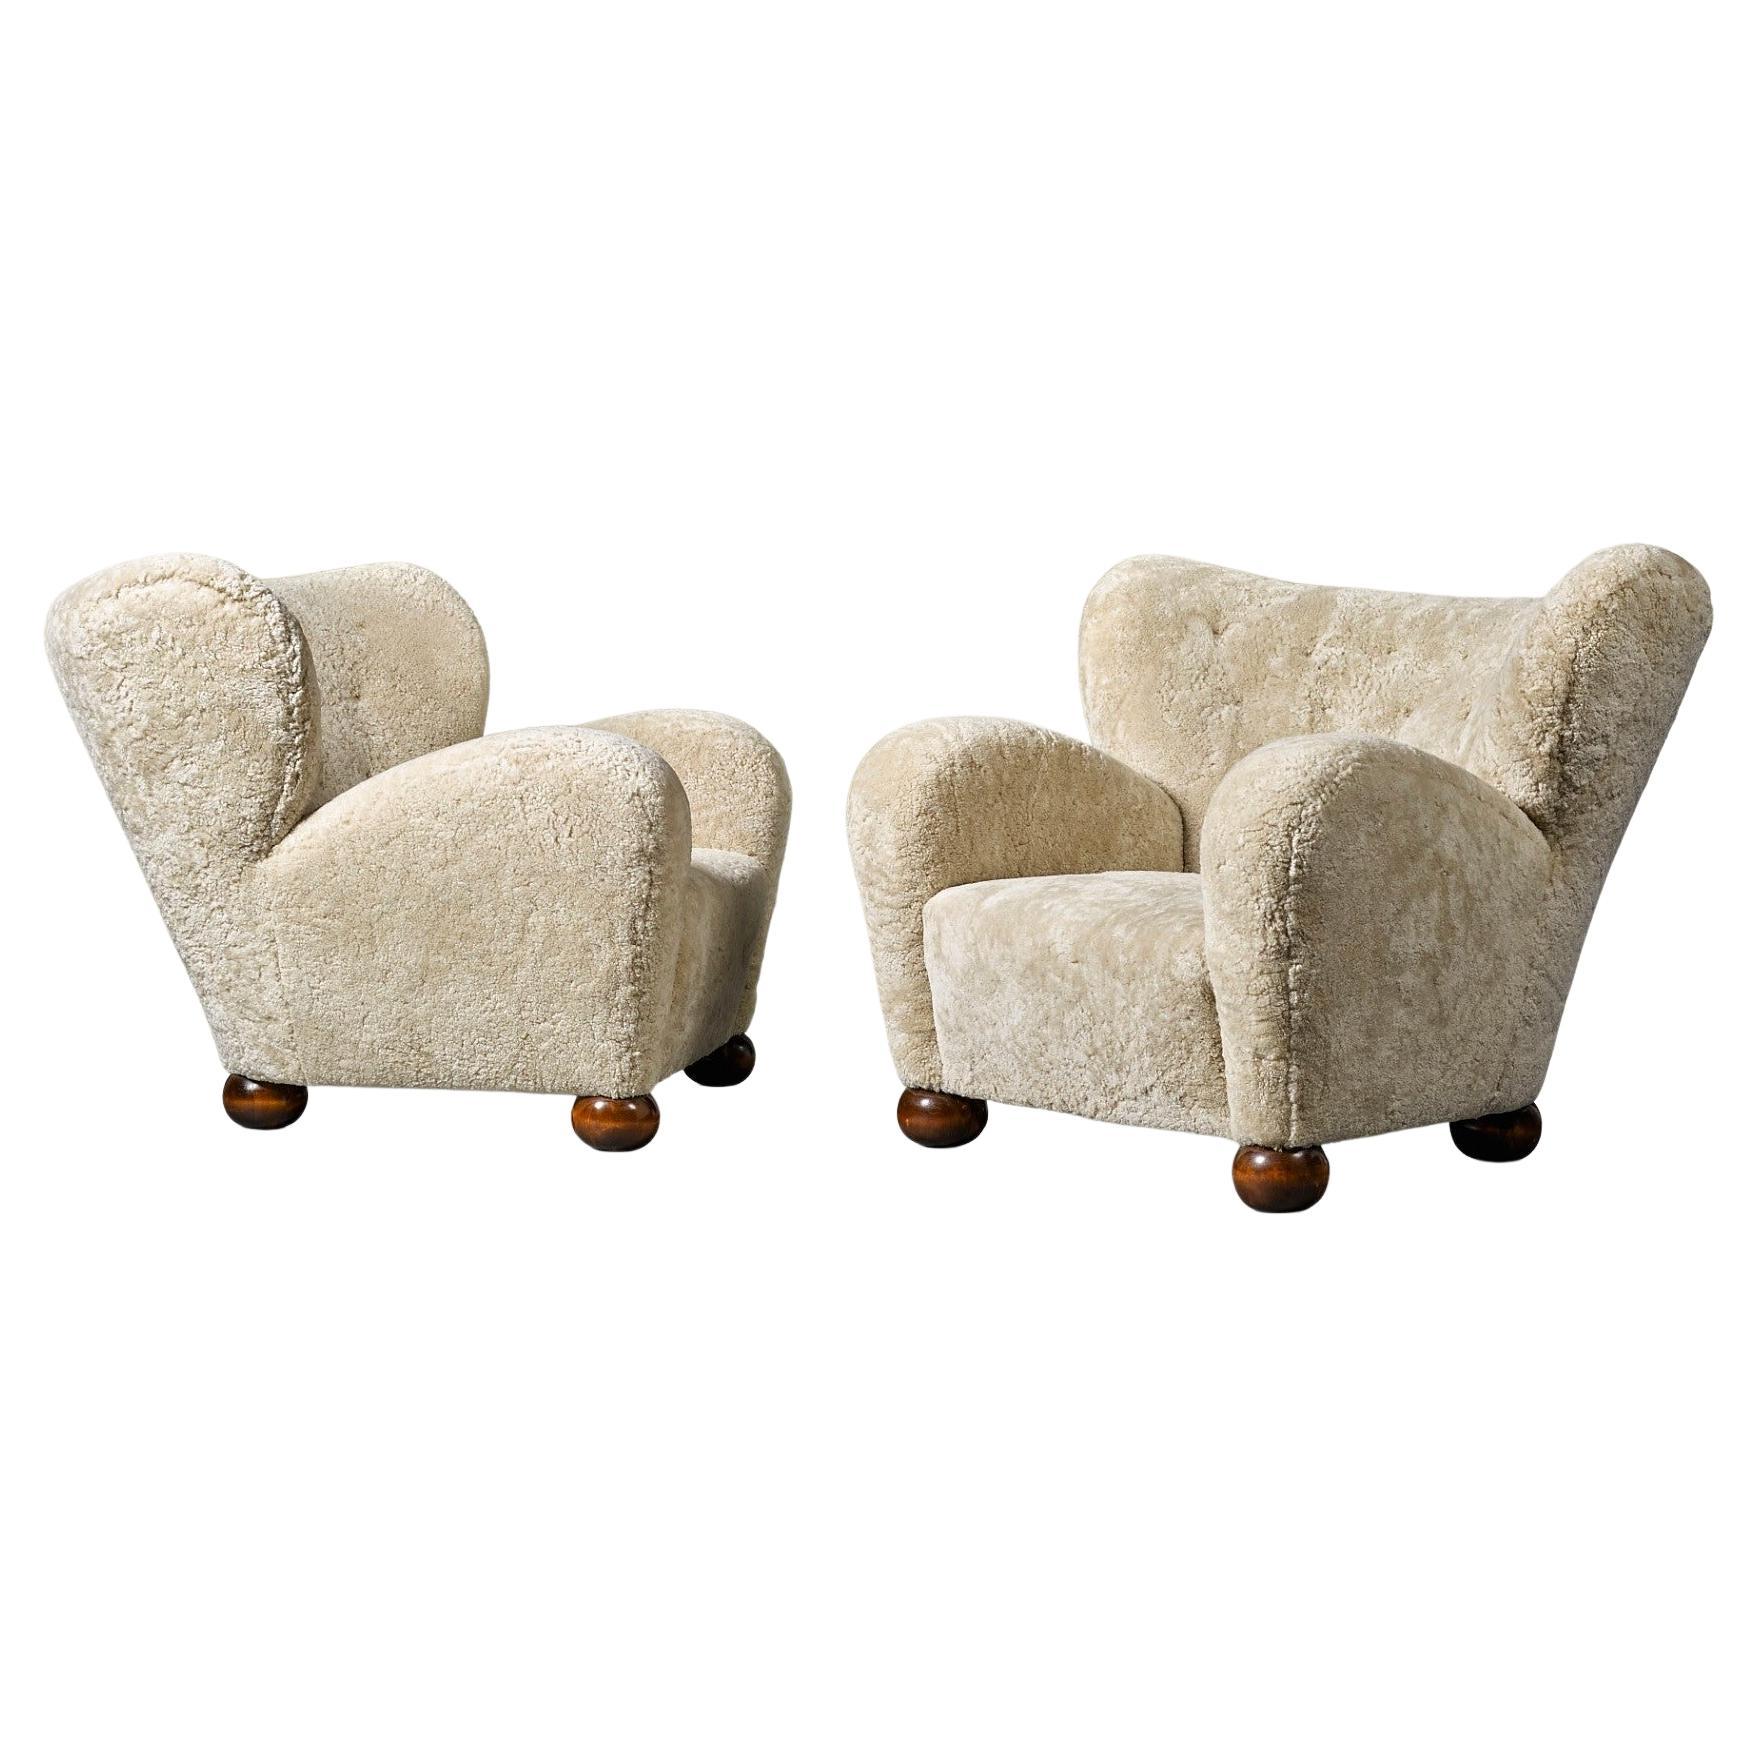 Marta Blomstedt Pair of Easy Chairs in Sheepskin for Hotel Aulanko Finland, 1939 For Sale